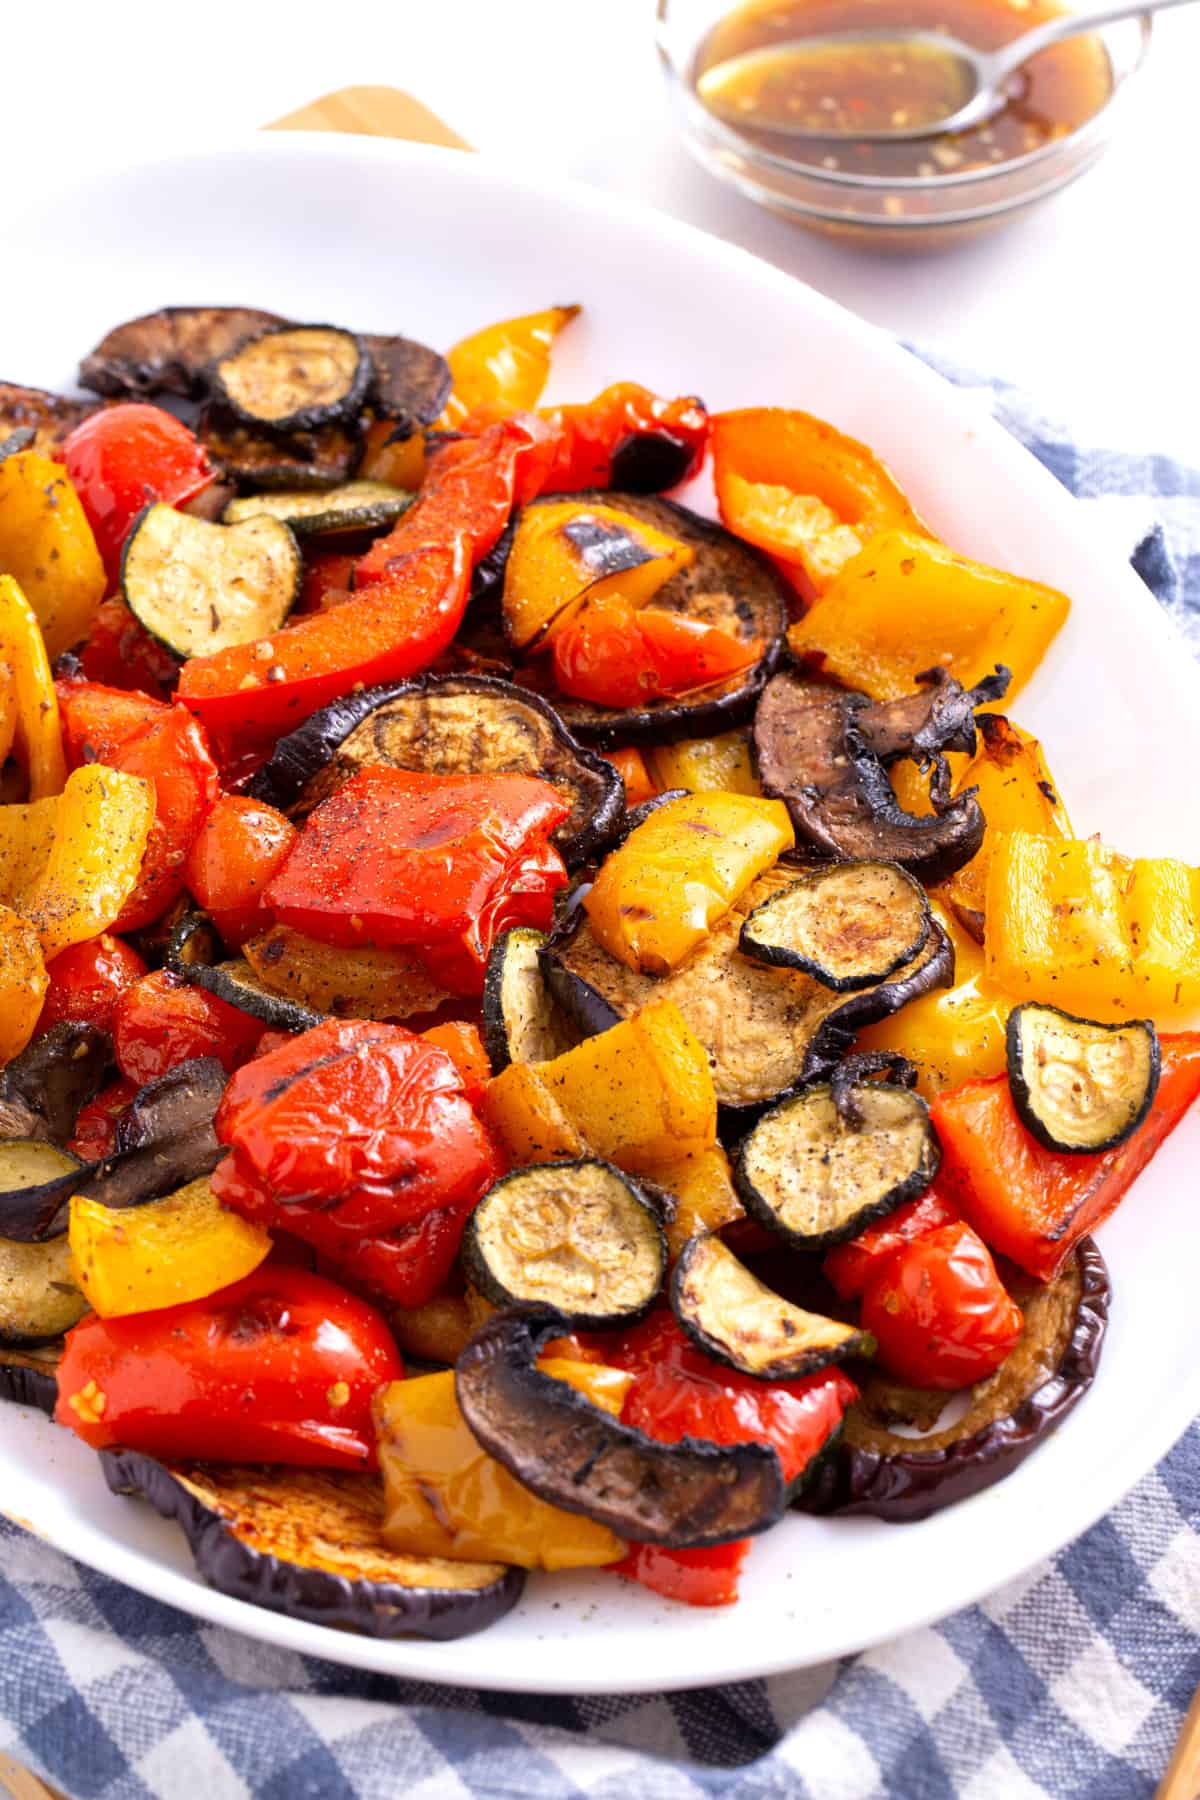 plate of grilled vegetables